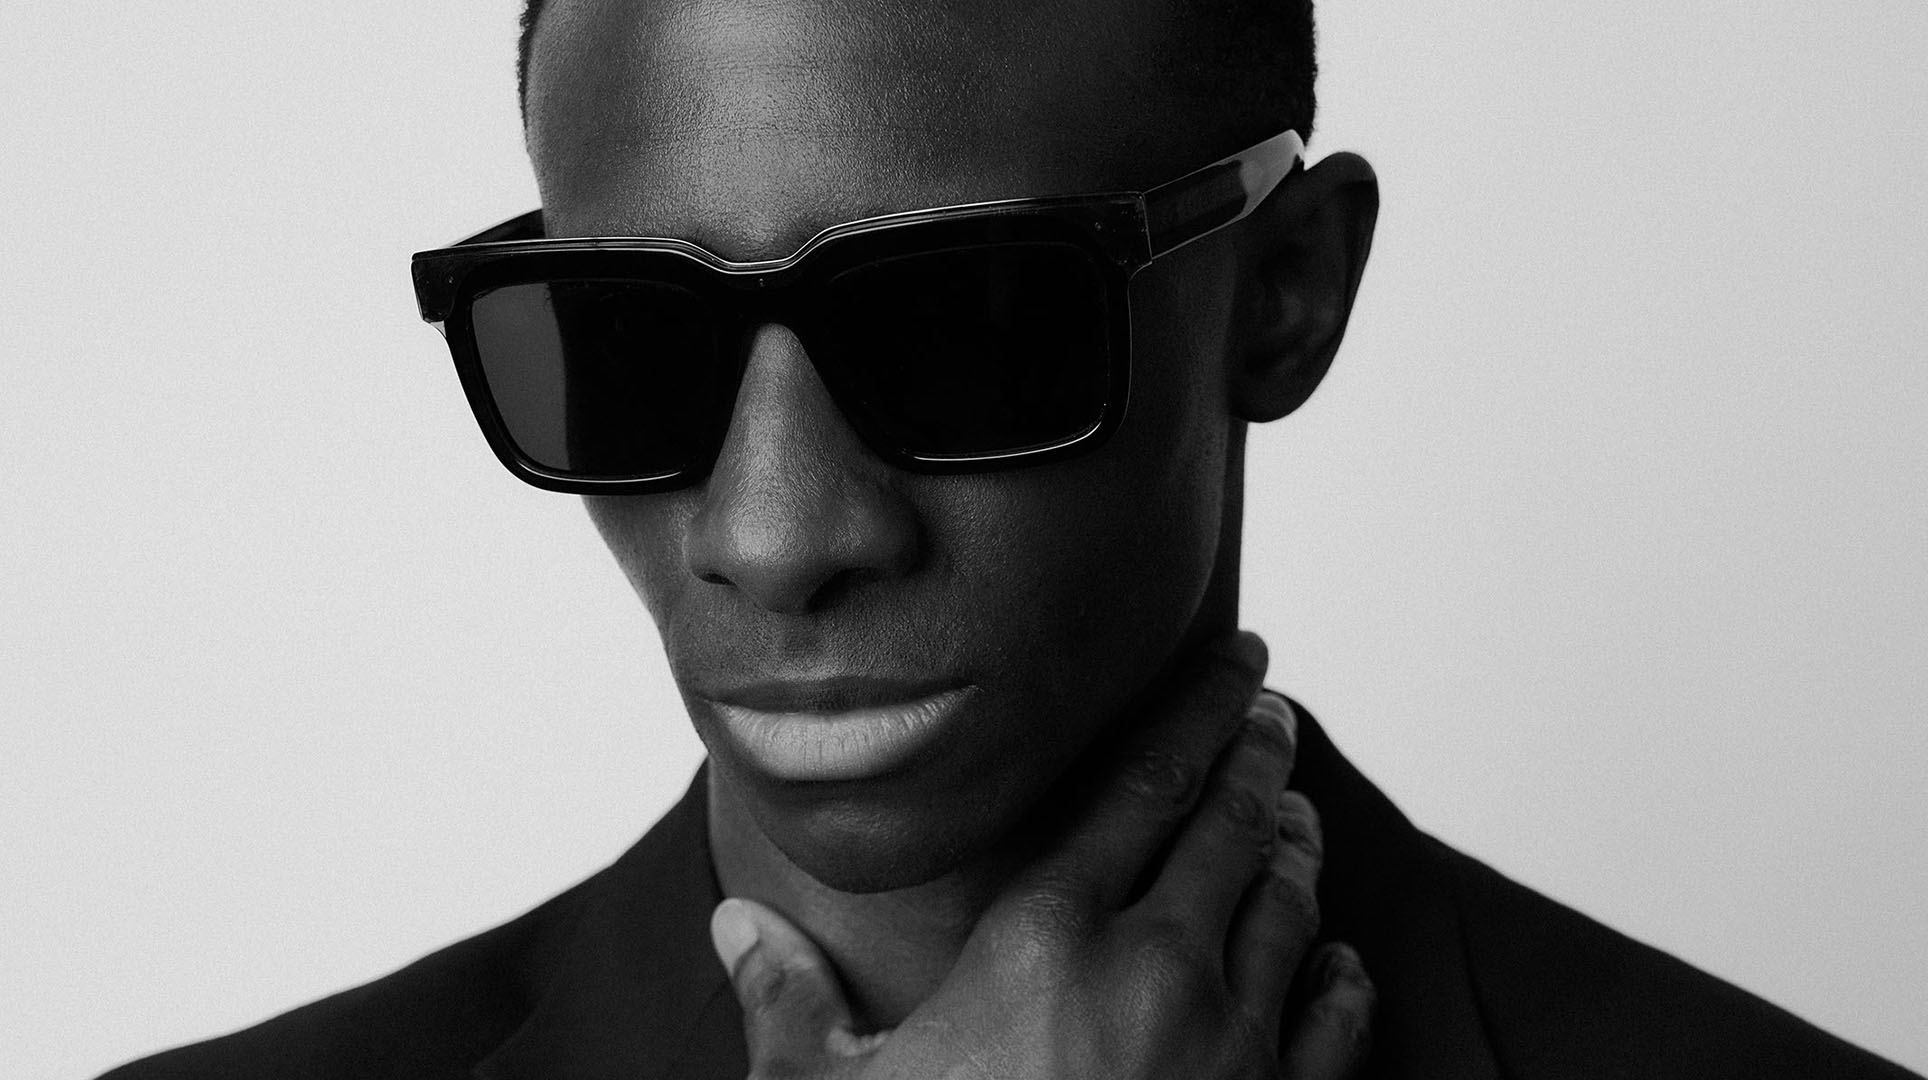 Optical frames and sunglasses to suit every face shape and style. Handmade in London, tailored to you